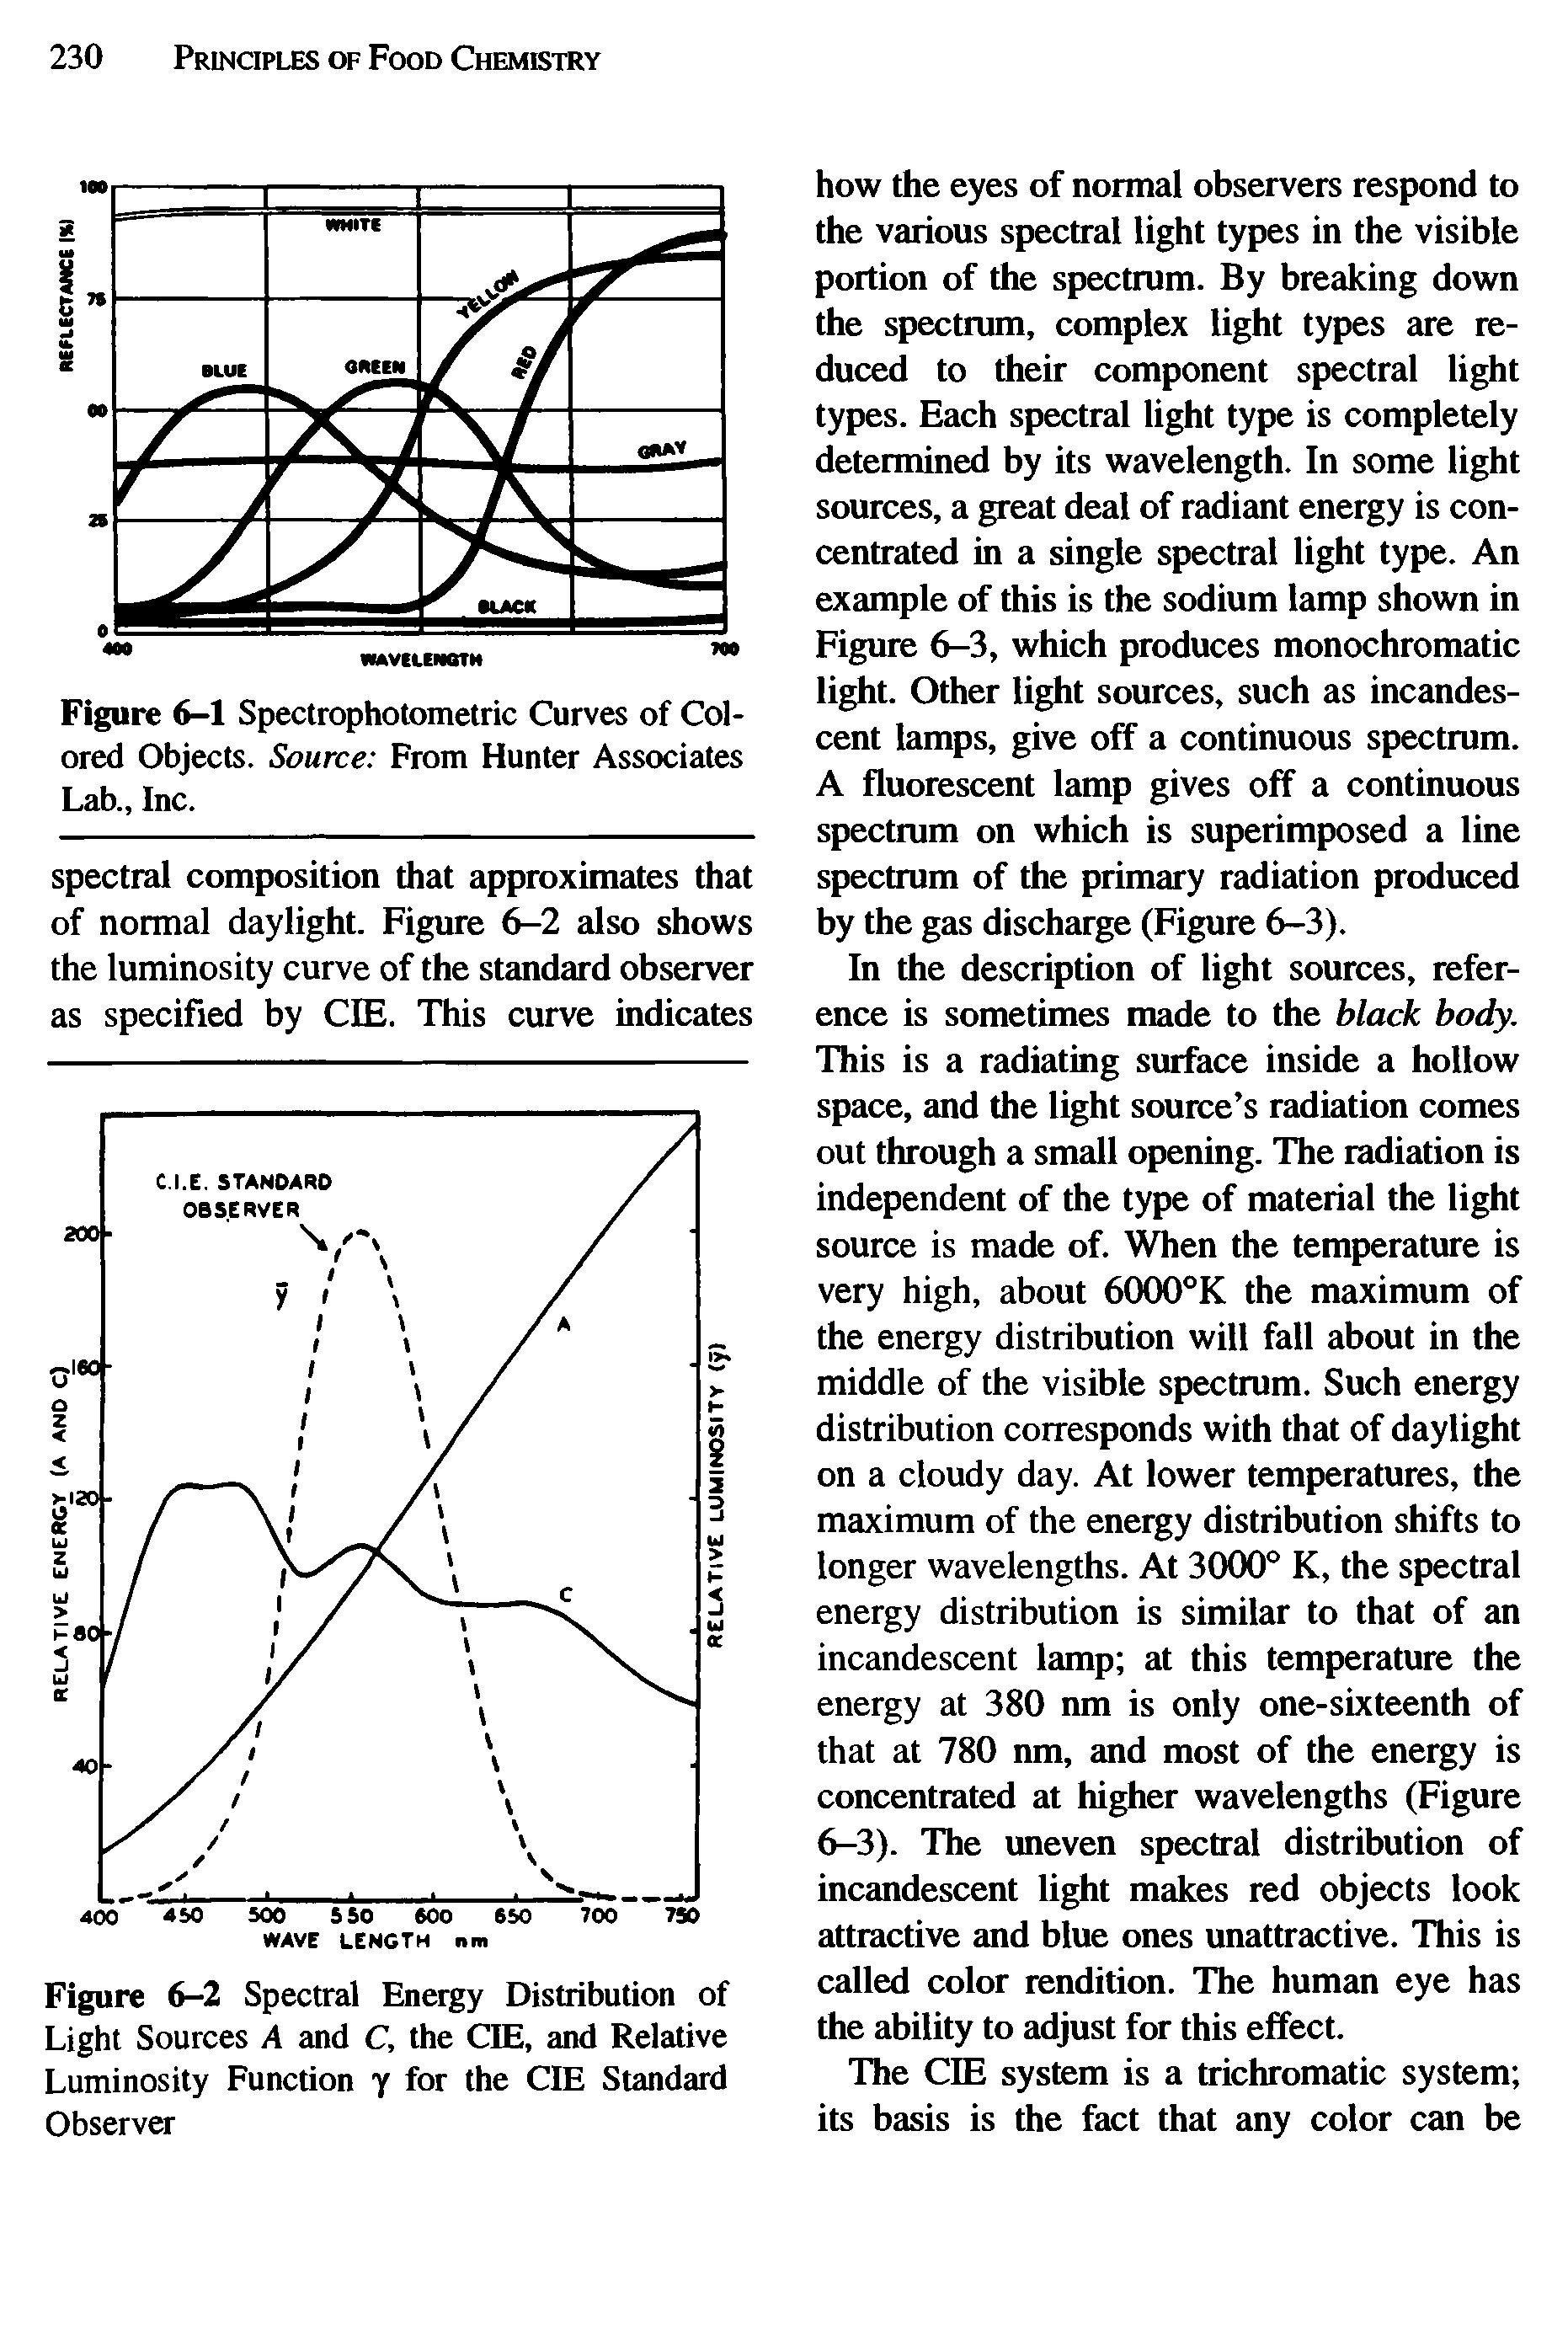 Figure 6-2 Spectral Energy Distribution of Light Sources A and C, the CIE, and Relative Luminosity Function y for the CIE Standard Observer...